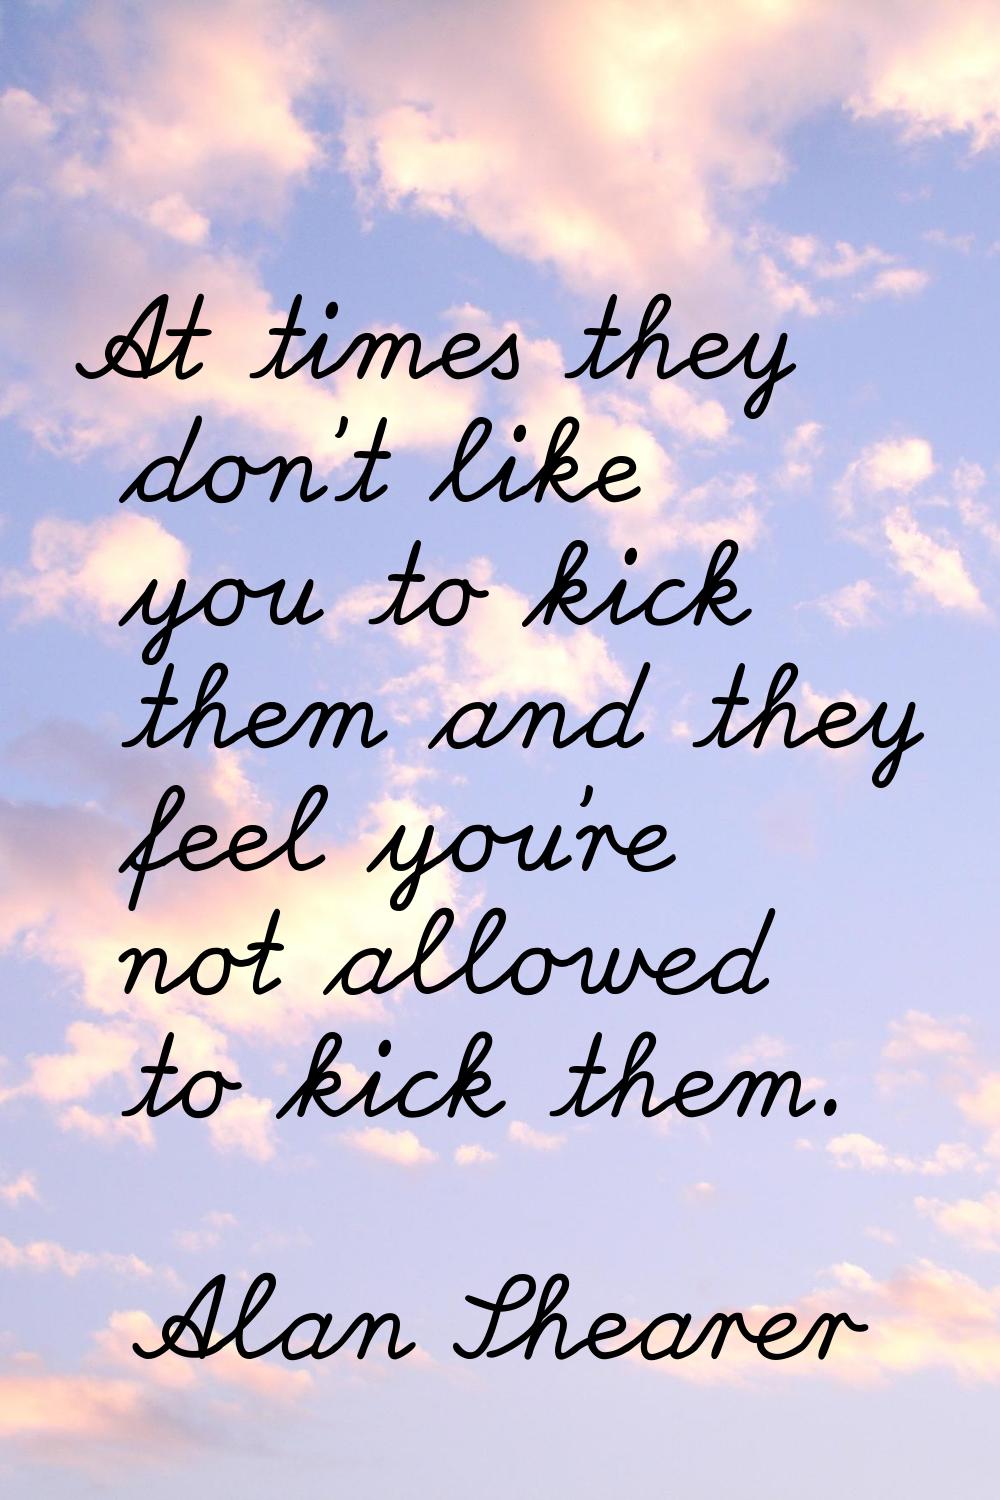 At times they don't like you to kick them and they feel you're not allowed to kick them.